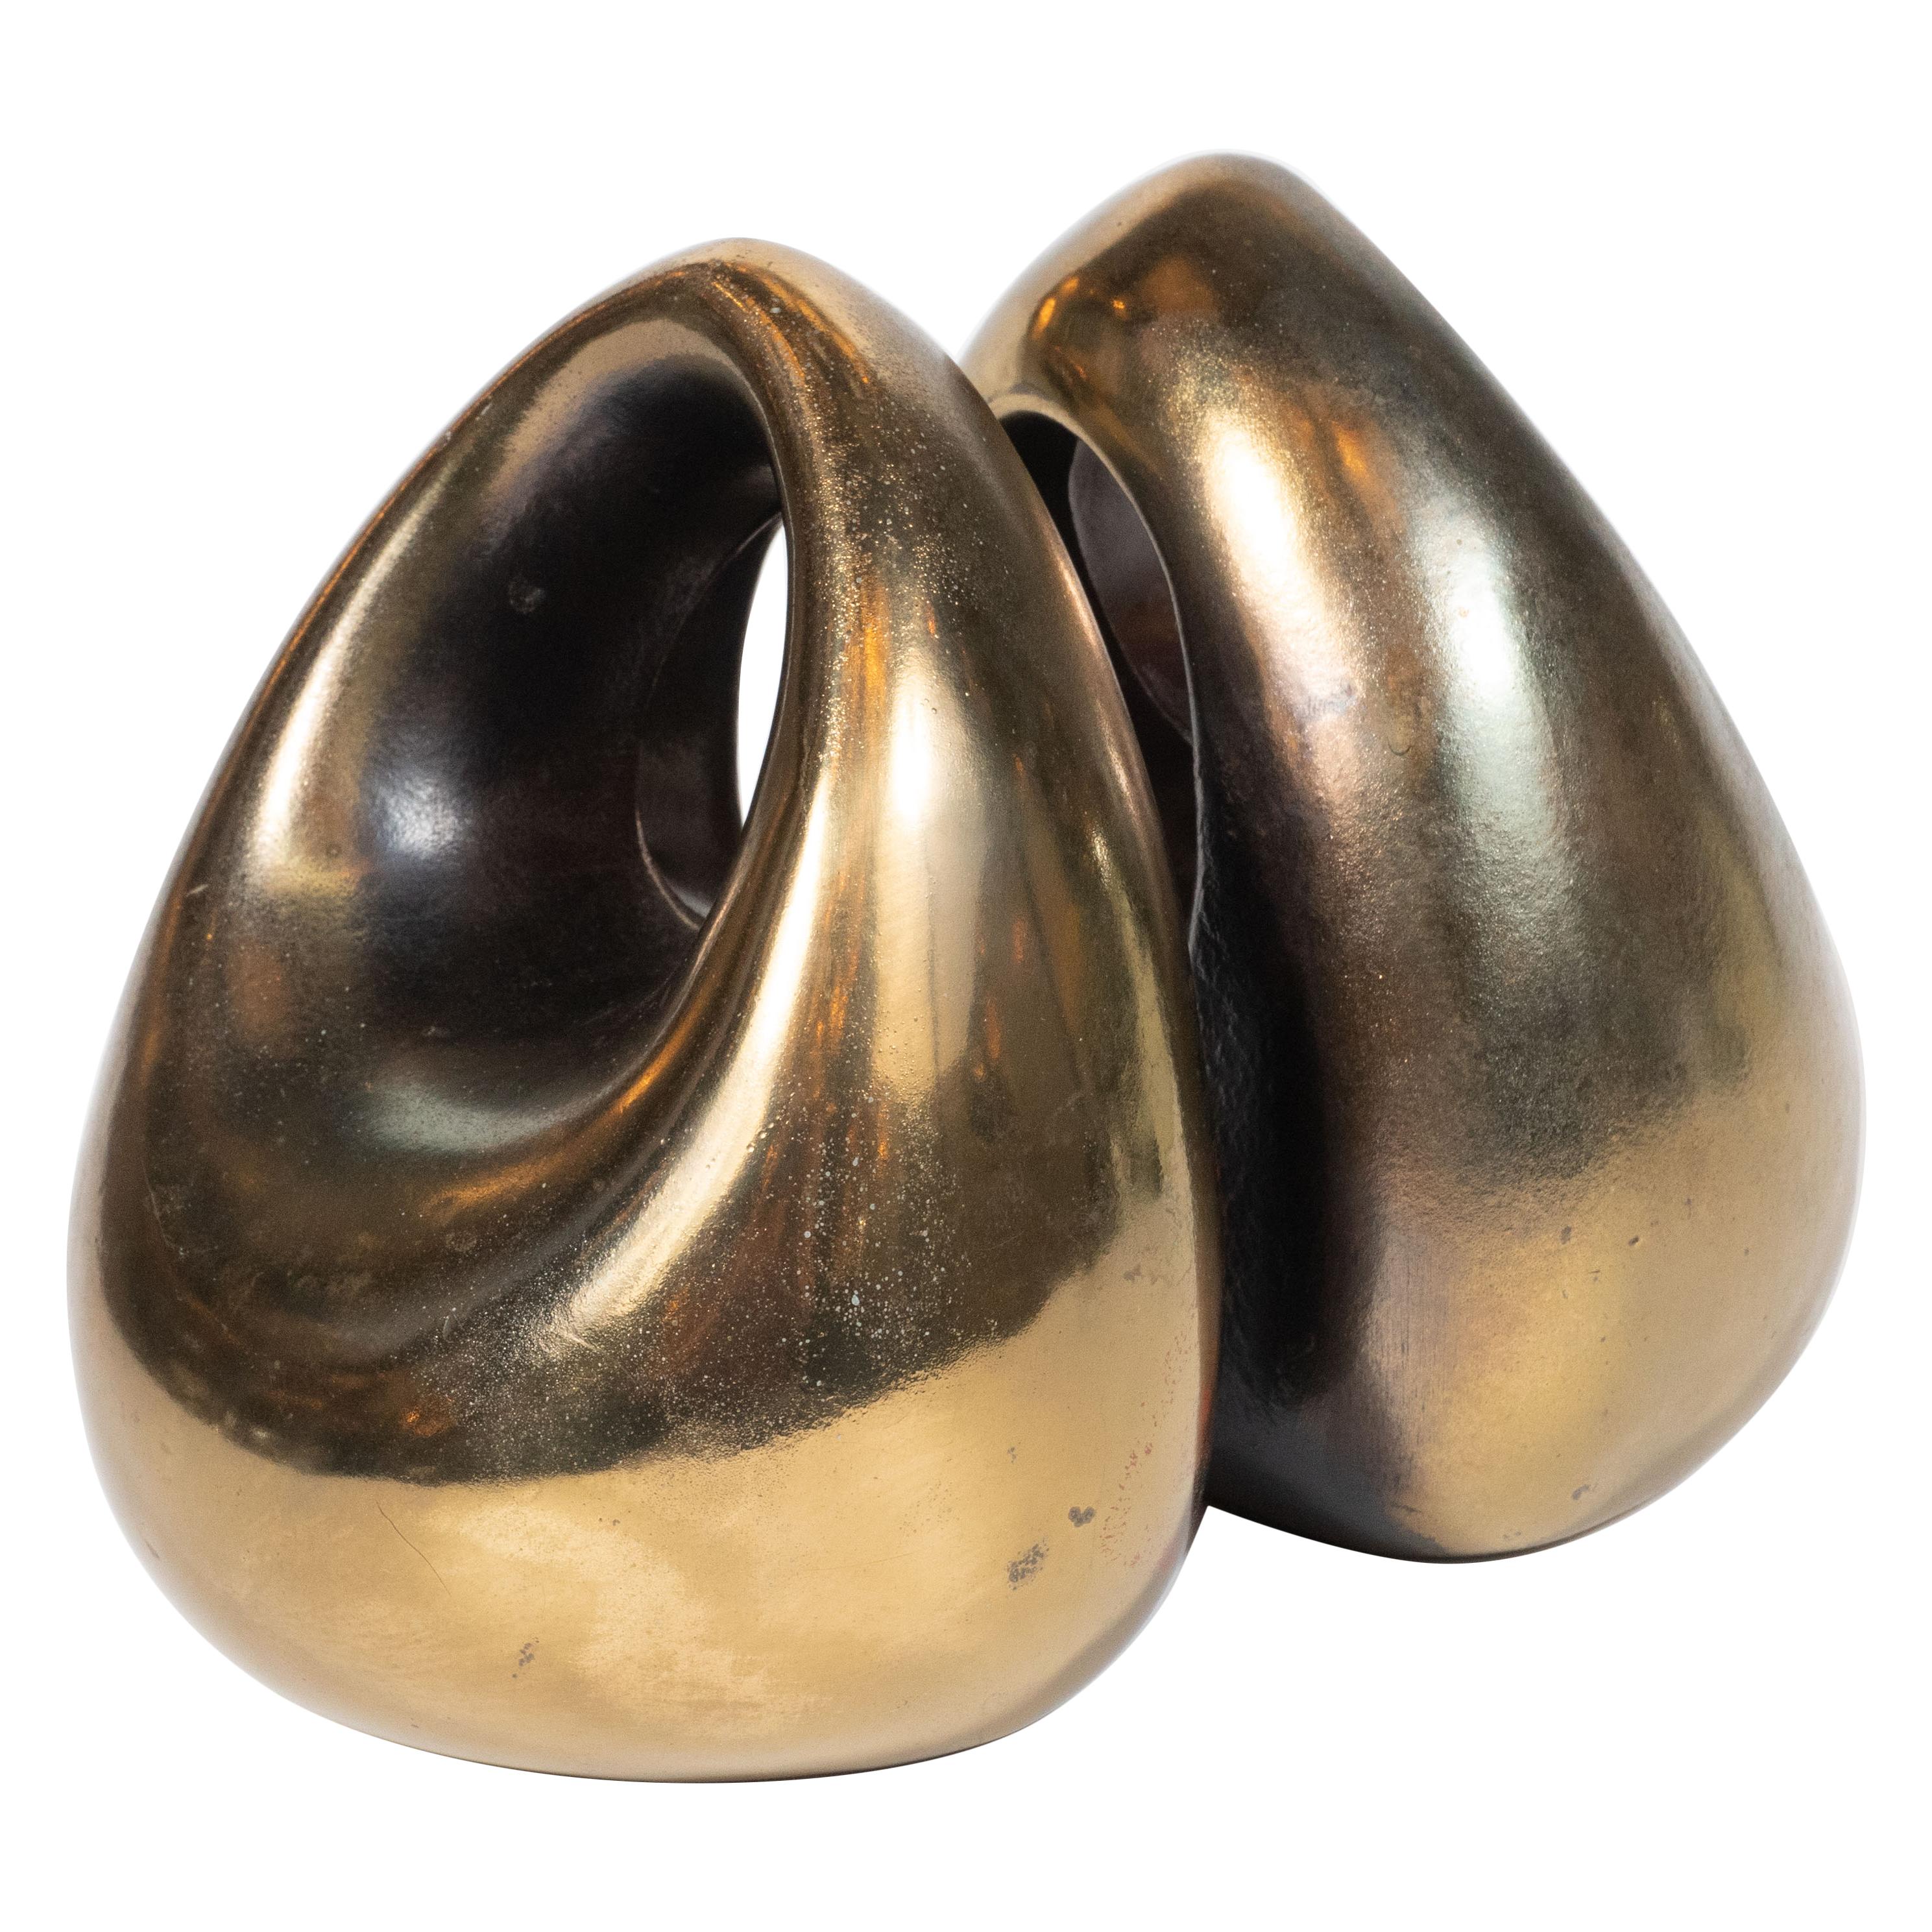 This elegant pair of book ends were realized by the esteemed Ben Seibel for Jenfred-Ware, circa 1950. They feature tear drop forms in glazed ceramic that come to an arched apex above a circular cut- all realized in a lustrous antiqued brass enamel